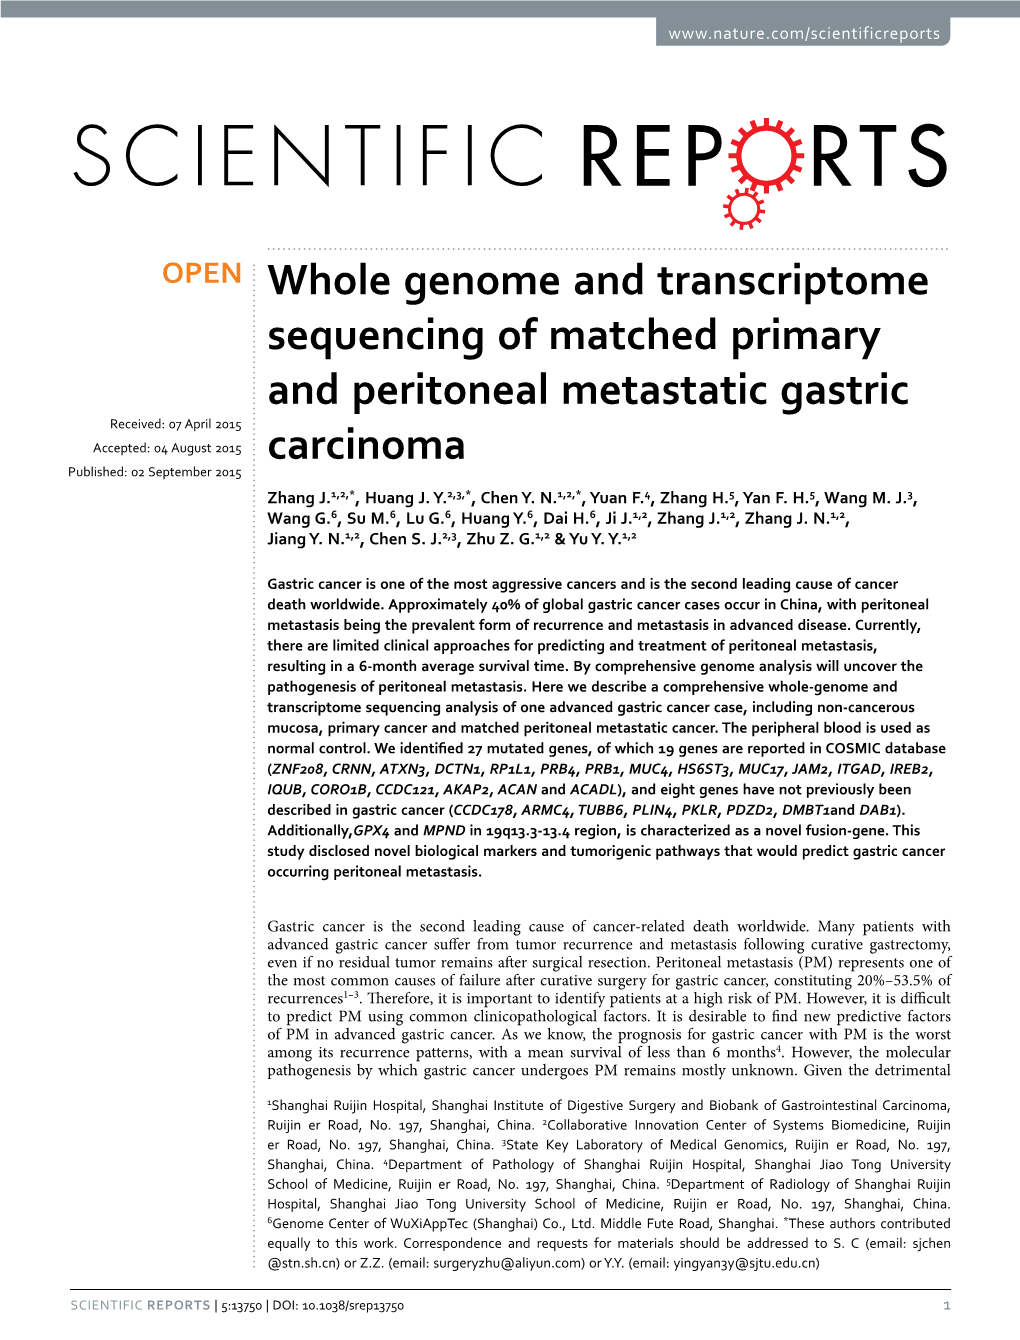 Whole Genome and Transcriptome Sequencing of Matched Primary And